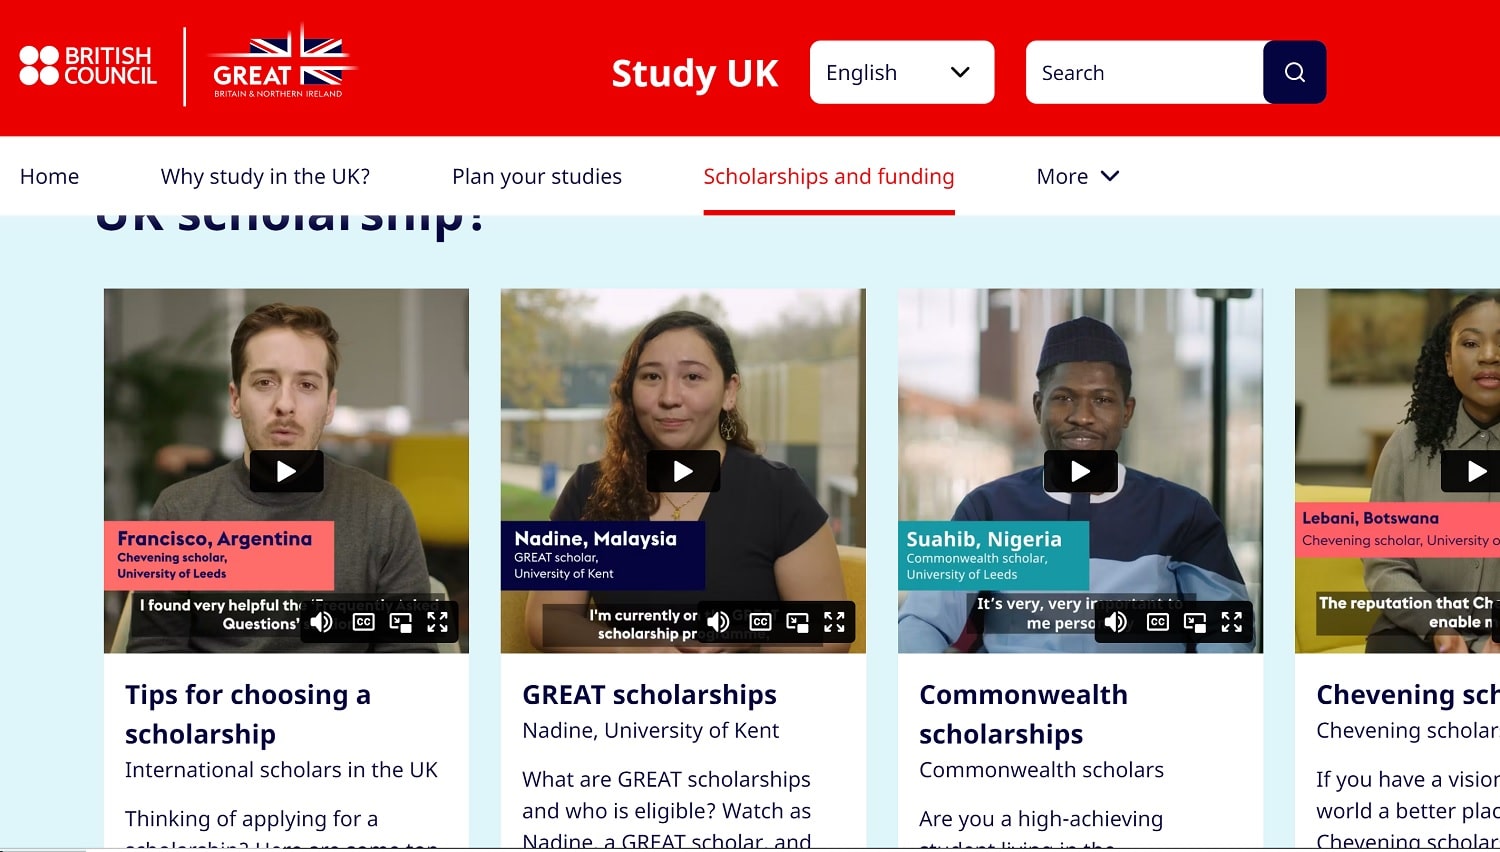 How to Get a Full Scholarship to Top UK Universities